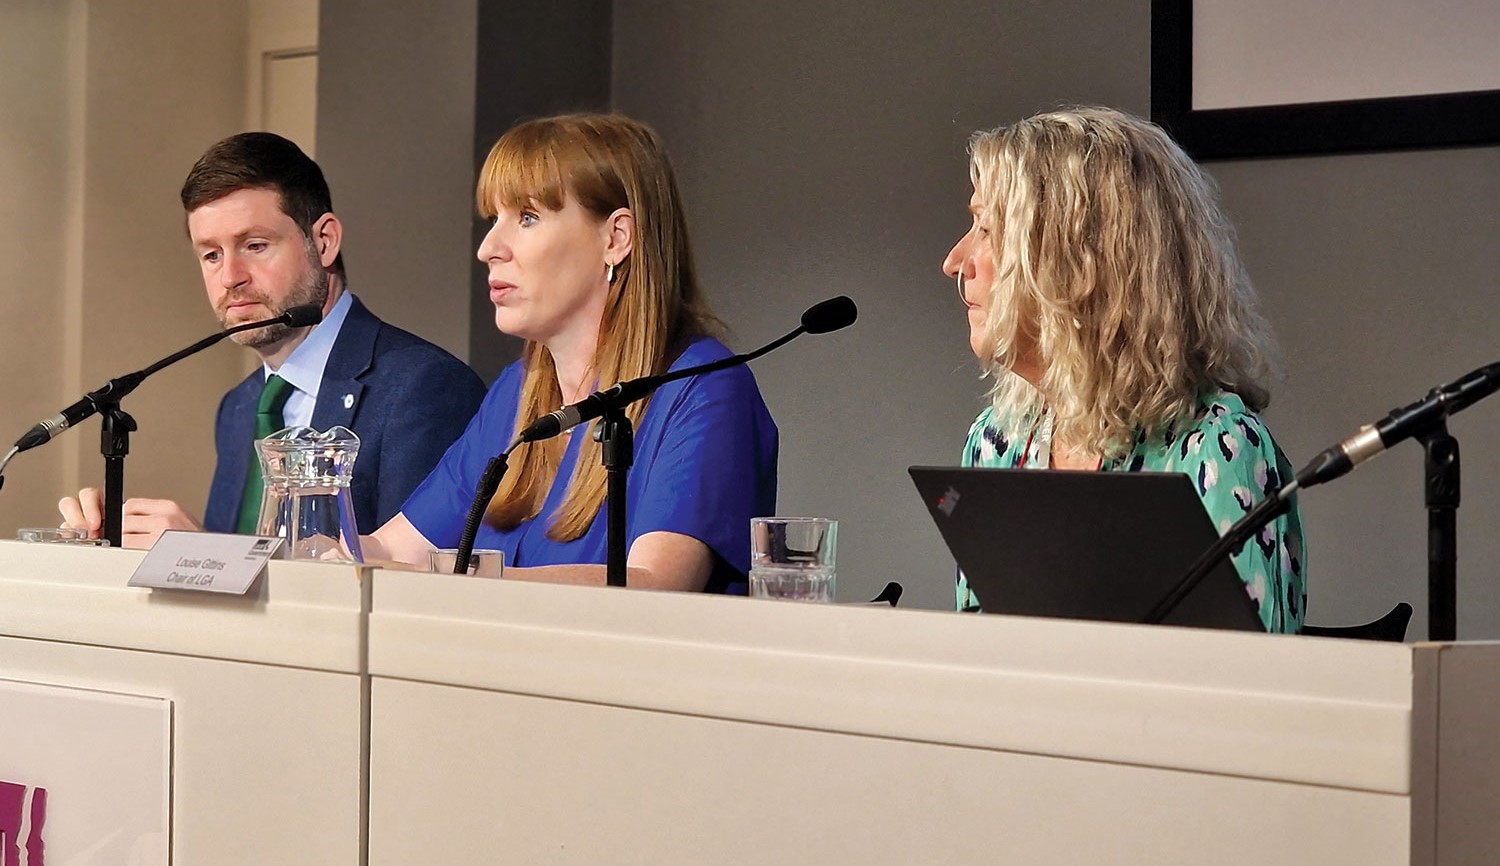 Photo of (l t r) Local Government Minister Jim McMahon, Deputy Prime Minister Angela Rayner, and LGA Chair Cllr Louise Gittins sitting together at a conference platform at LGA’s Smith Square offices